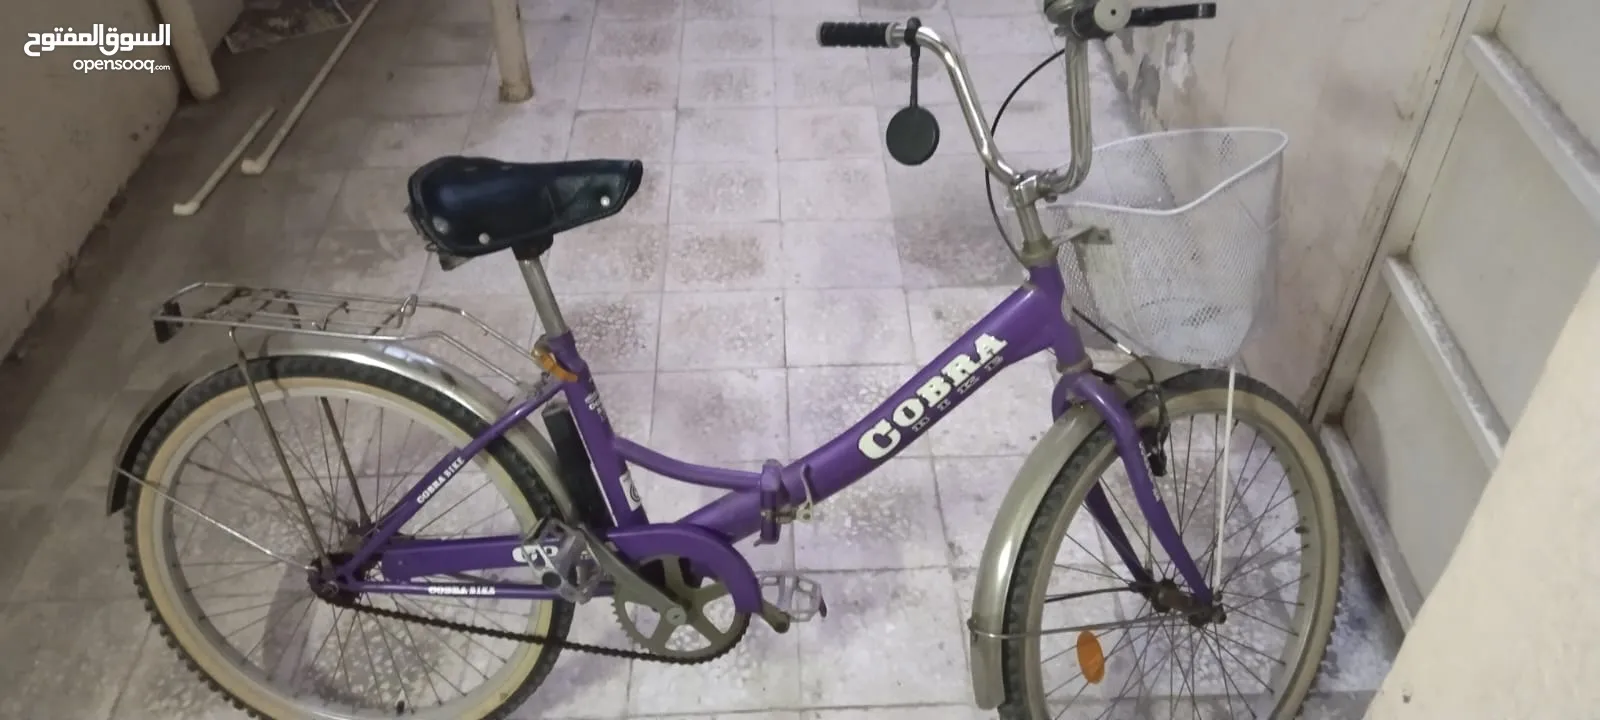 Rarely used adult cycle for sale 15kd